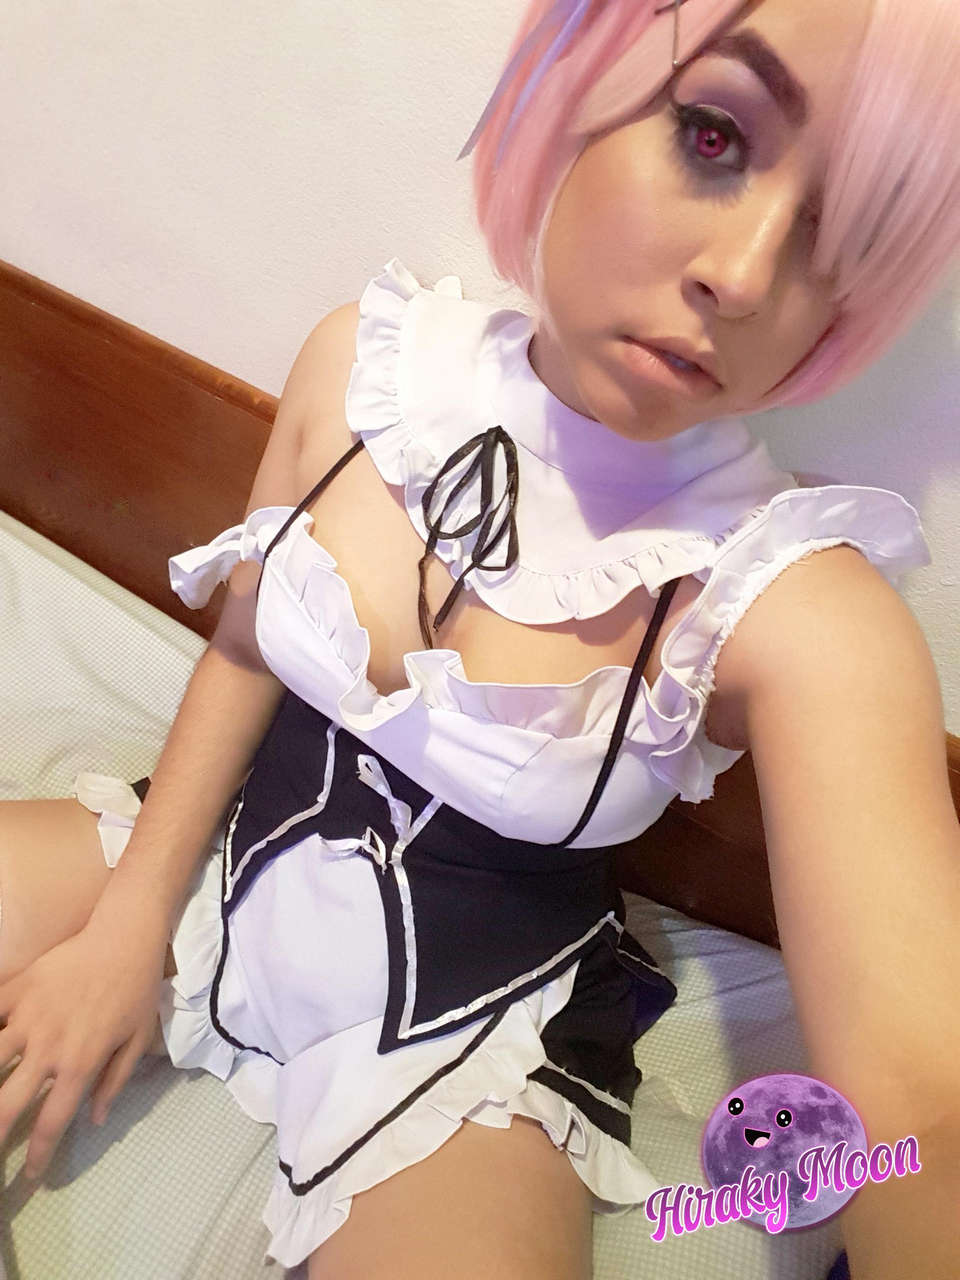 R Cosplaygal